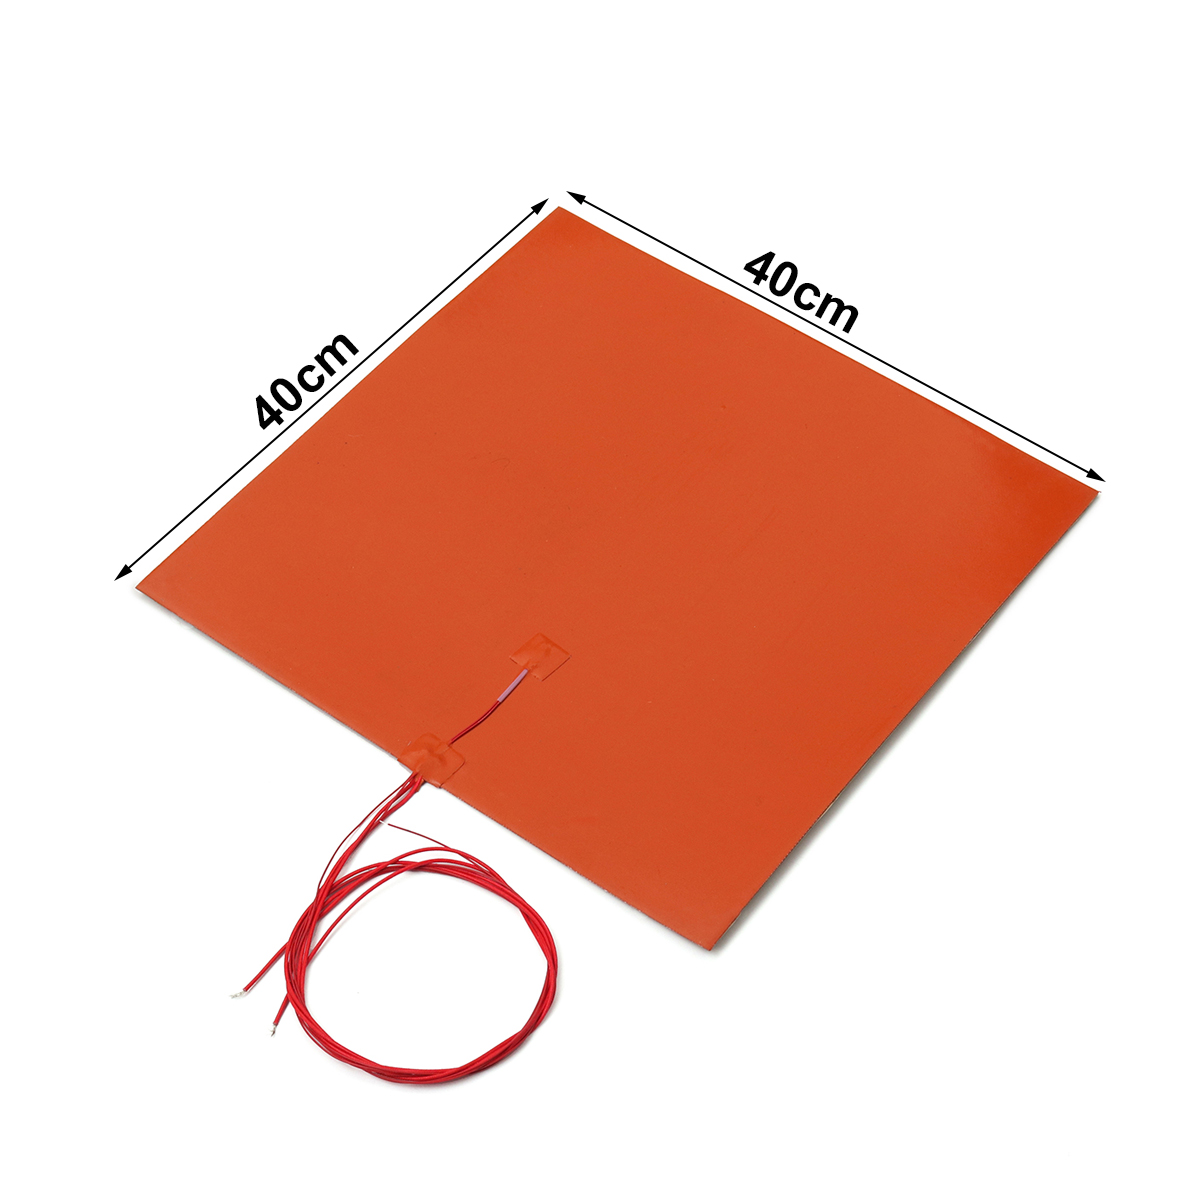 1400w 240V 400*400mm Silicone Heater Bed Pad For 3D Printer Without Hole 9